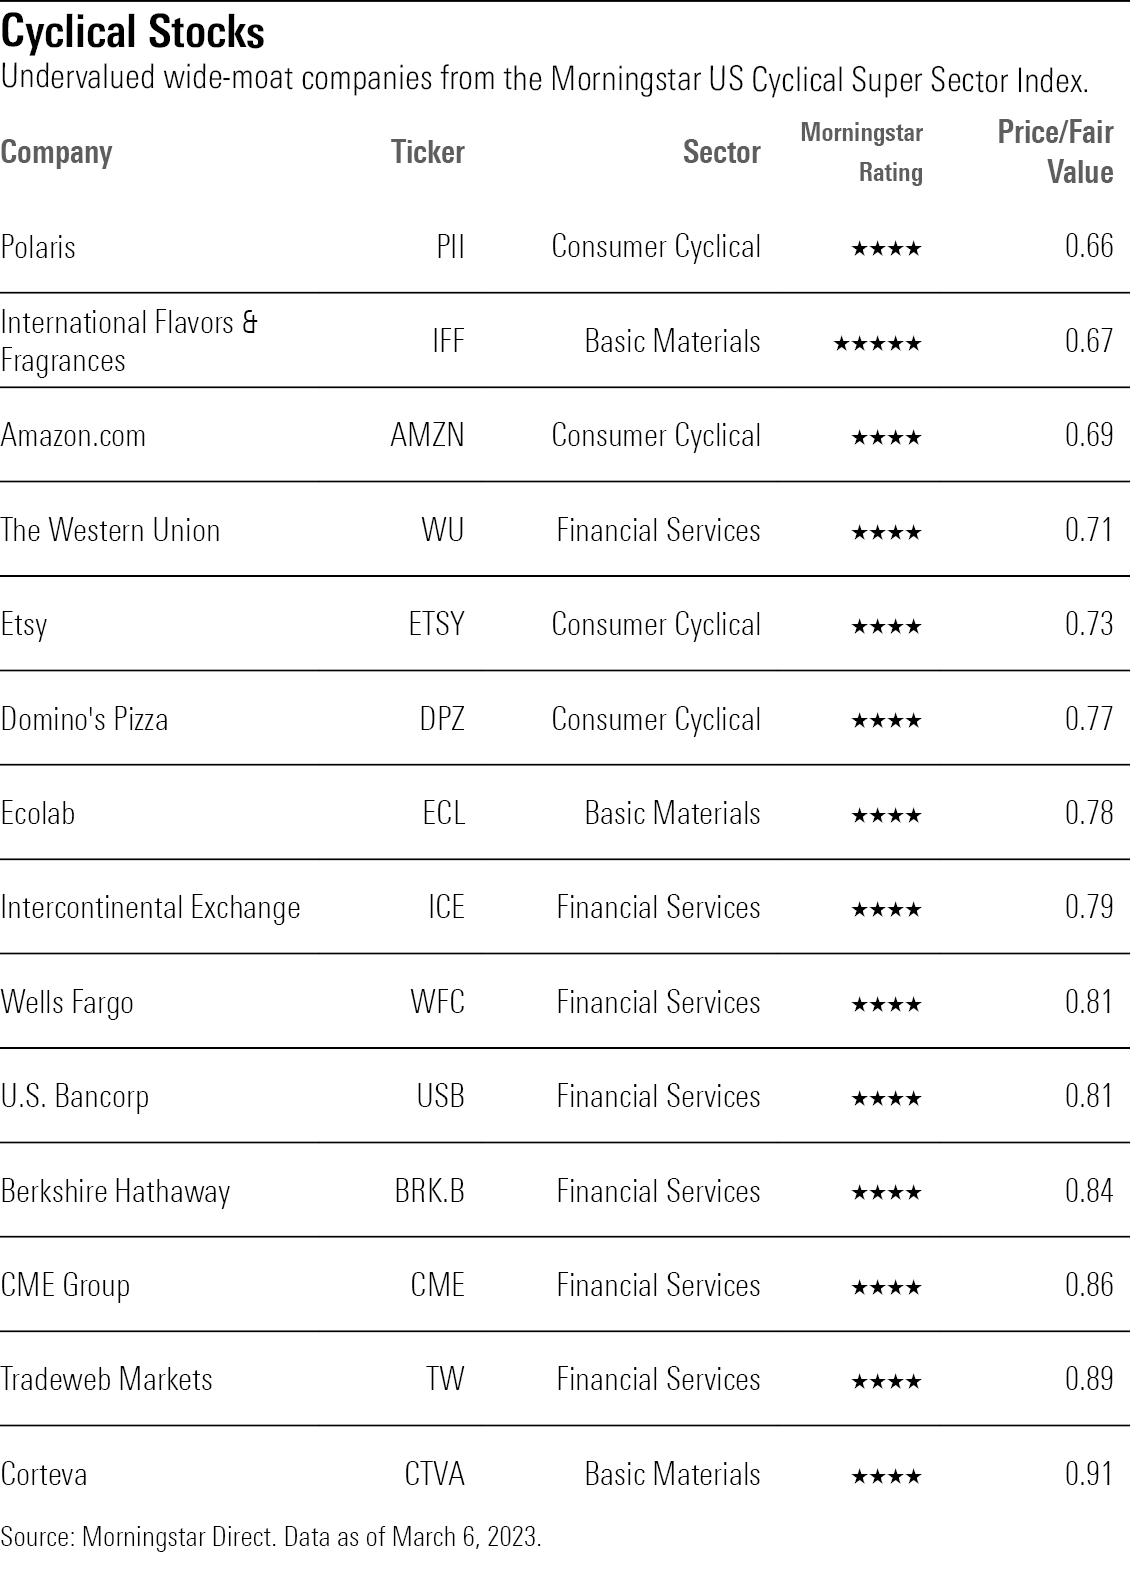 List of the 14 undervalued wide-moat companies from the Morningstar Cyclical Super Sector Index.